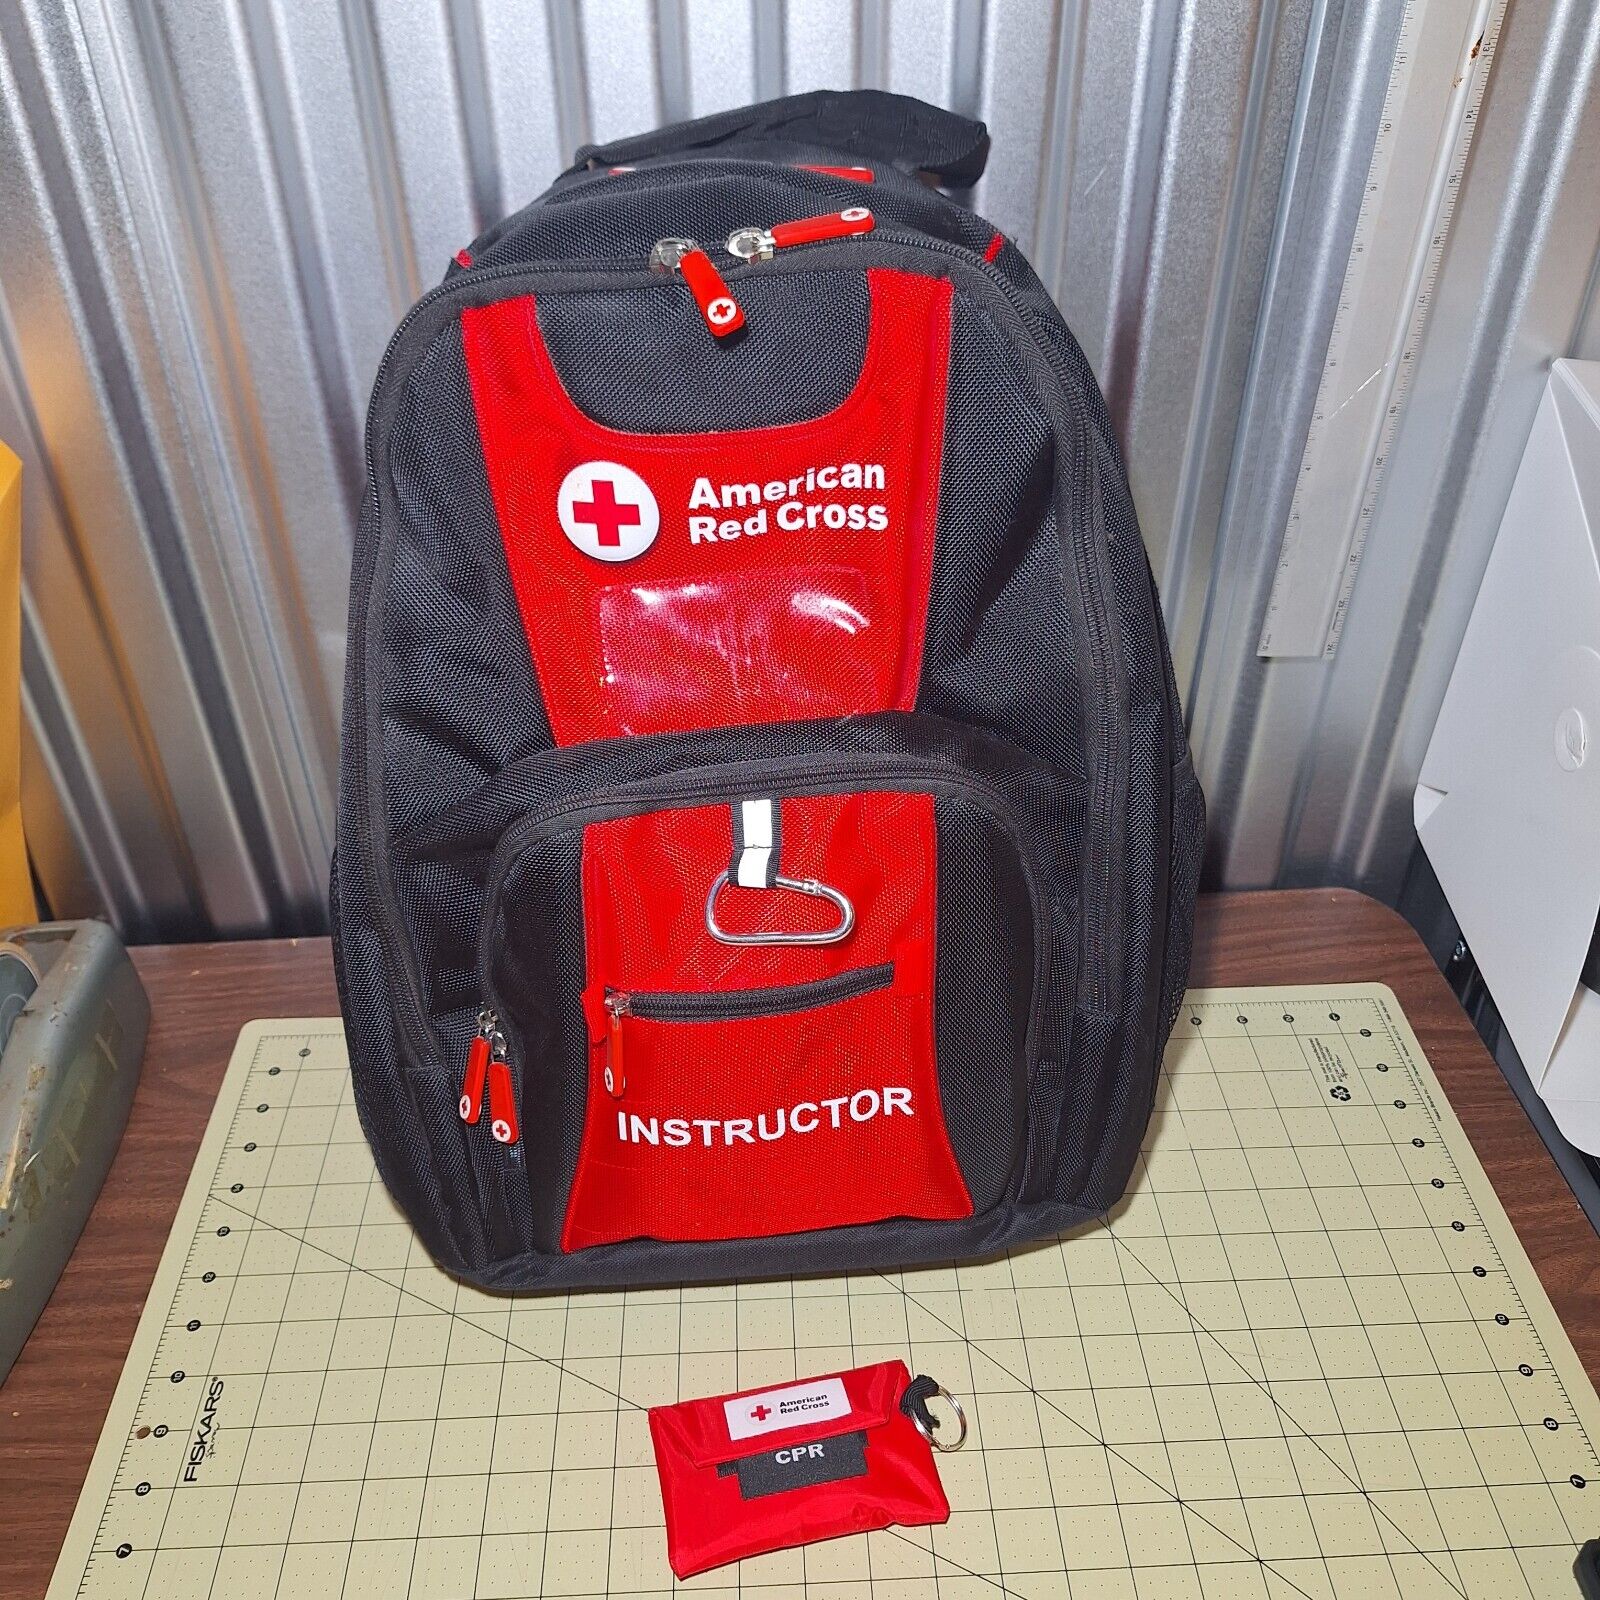 American Red Cross Instructor Backpack Black Red Pockets Used Great Shape